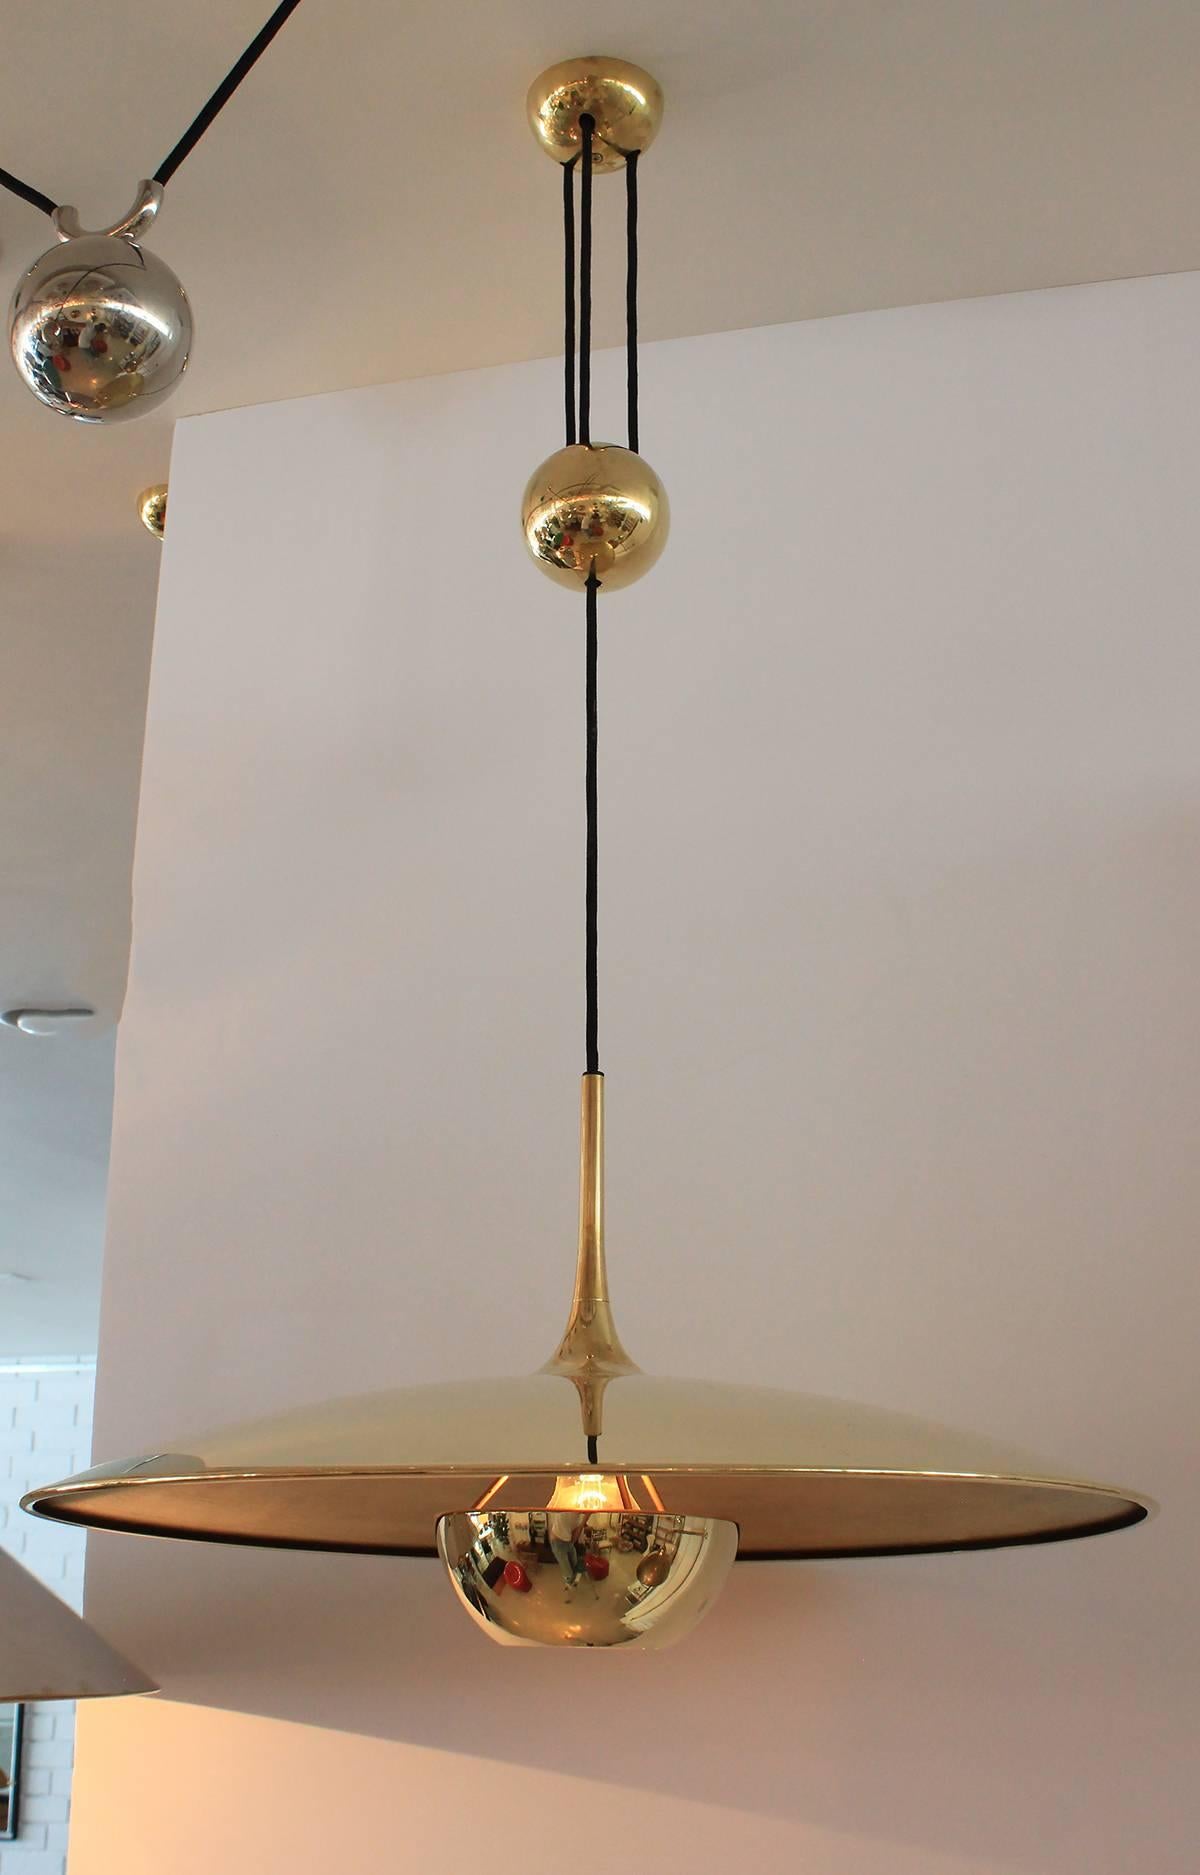 Brass counter balance pendant by German lighting manufacturer Florian Schulz. Heavy brass ball counter-weight and brass disc. Cloth cord. Great patina to brass. Excellent vintage condition. Height is adjustable.